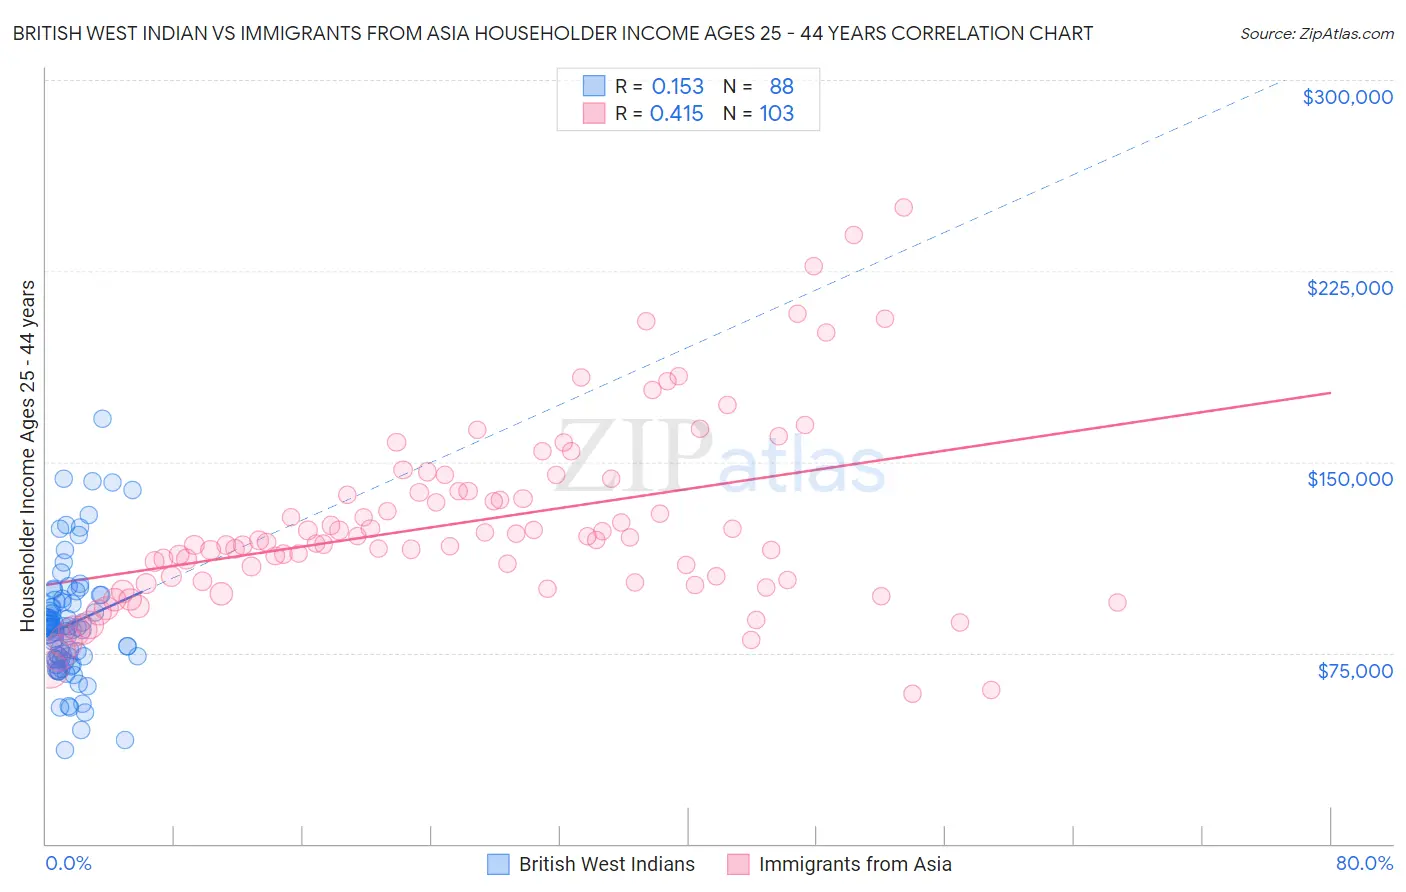 British West Indian vs Immigrants from Asia Householder Income Ages 25 - 44 years